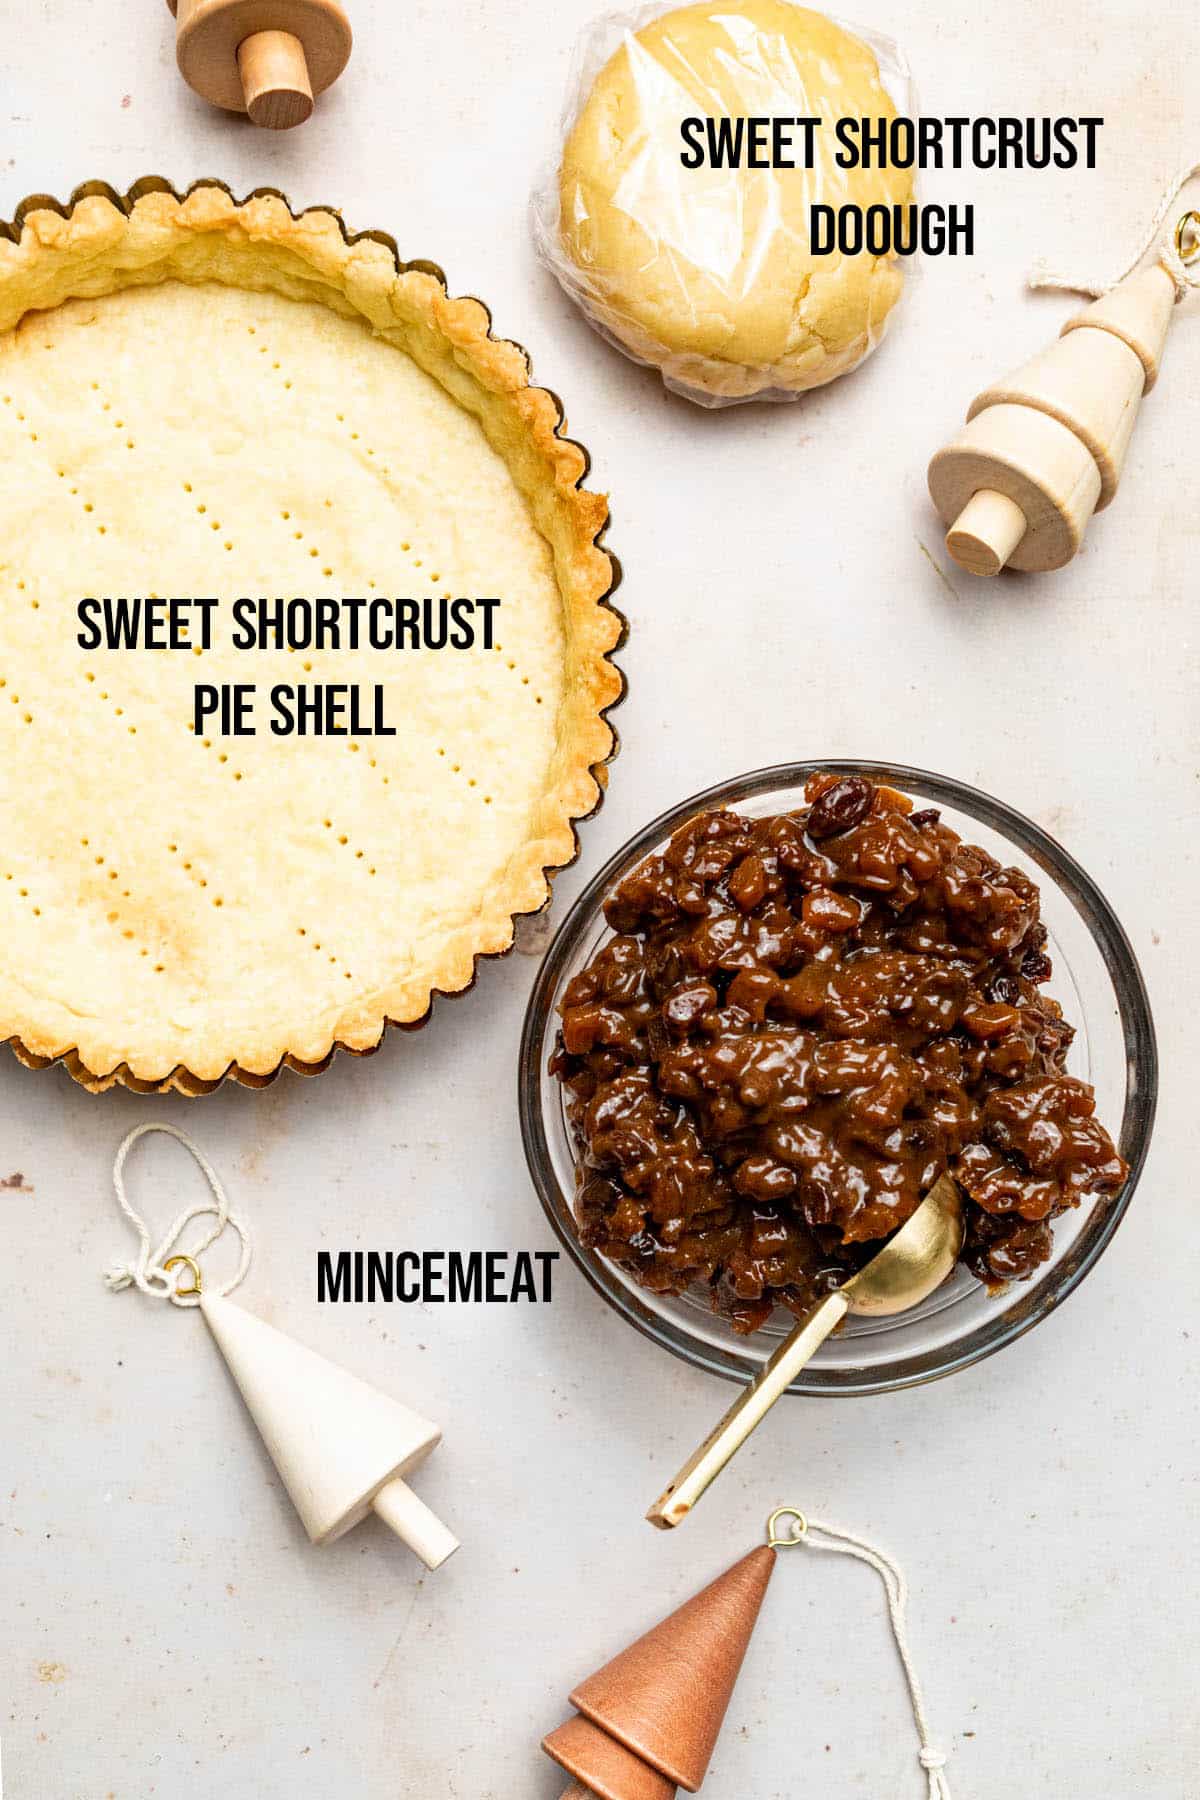 Mincemeat pie ingredients with labels.